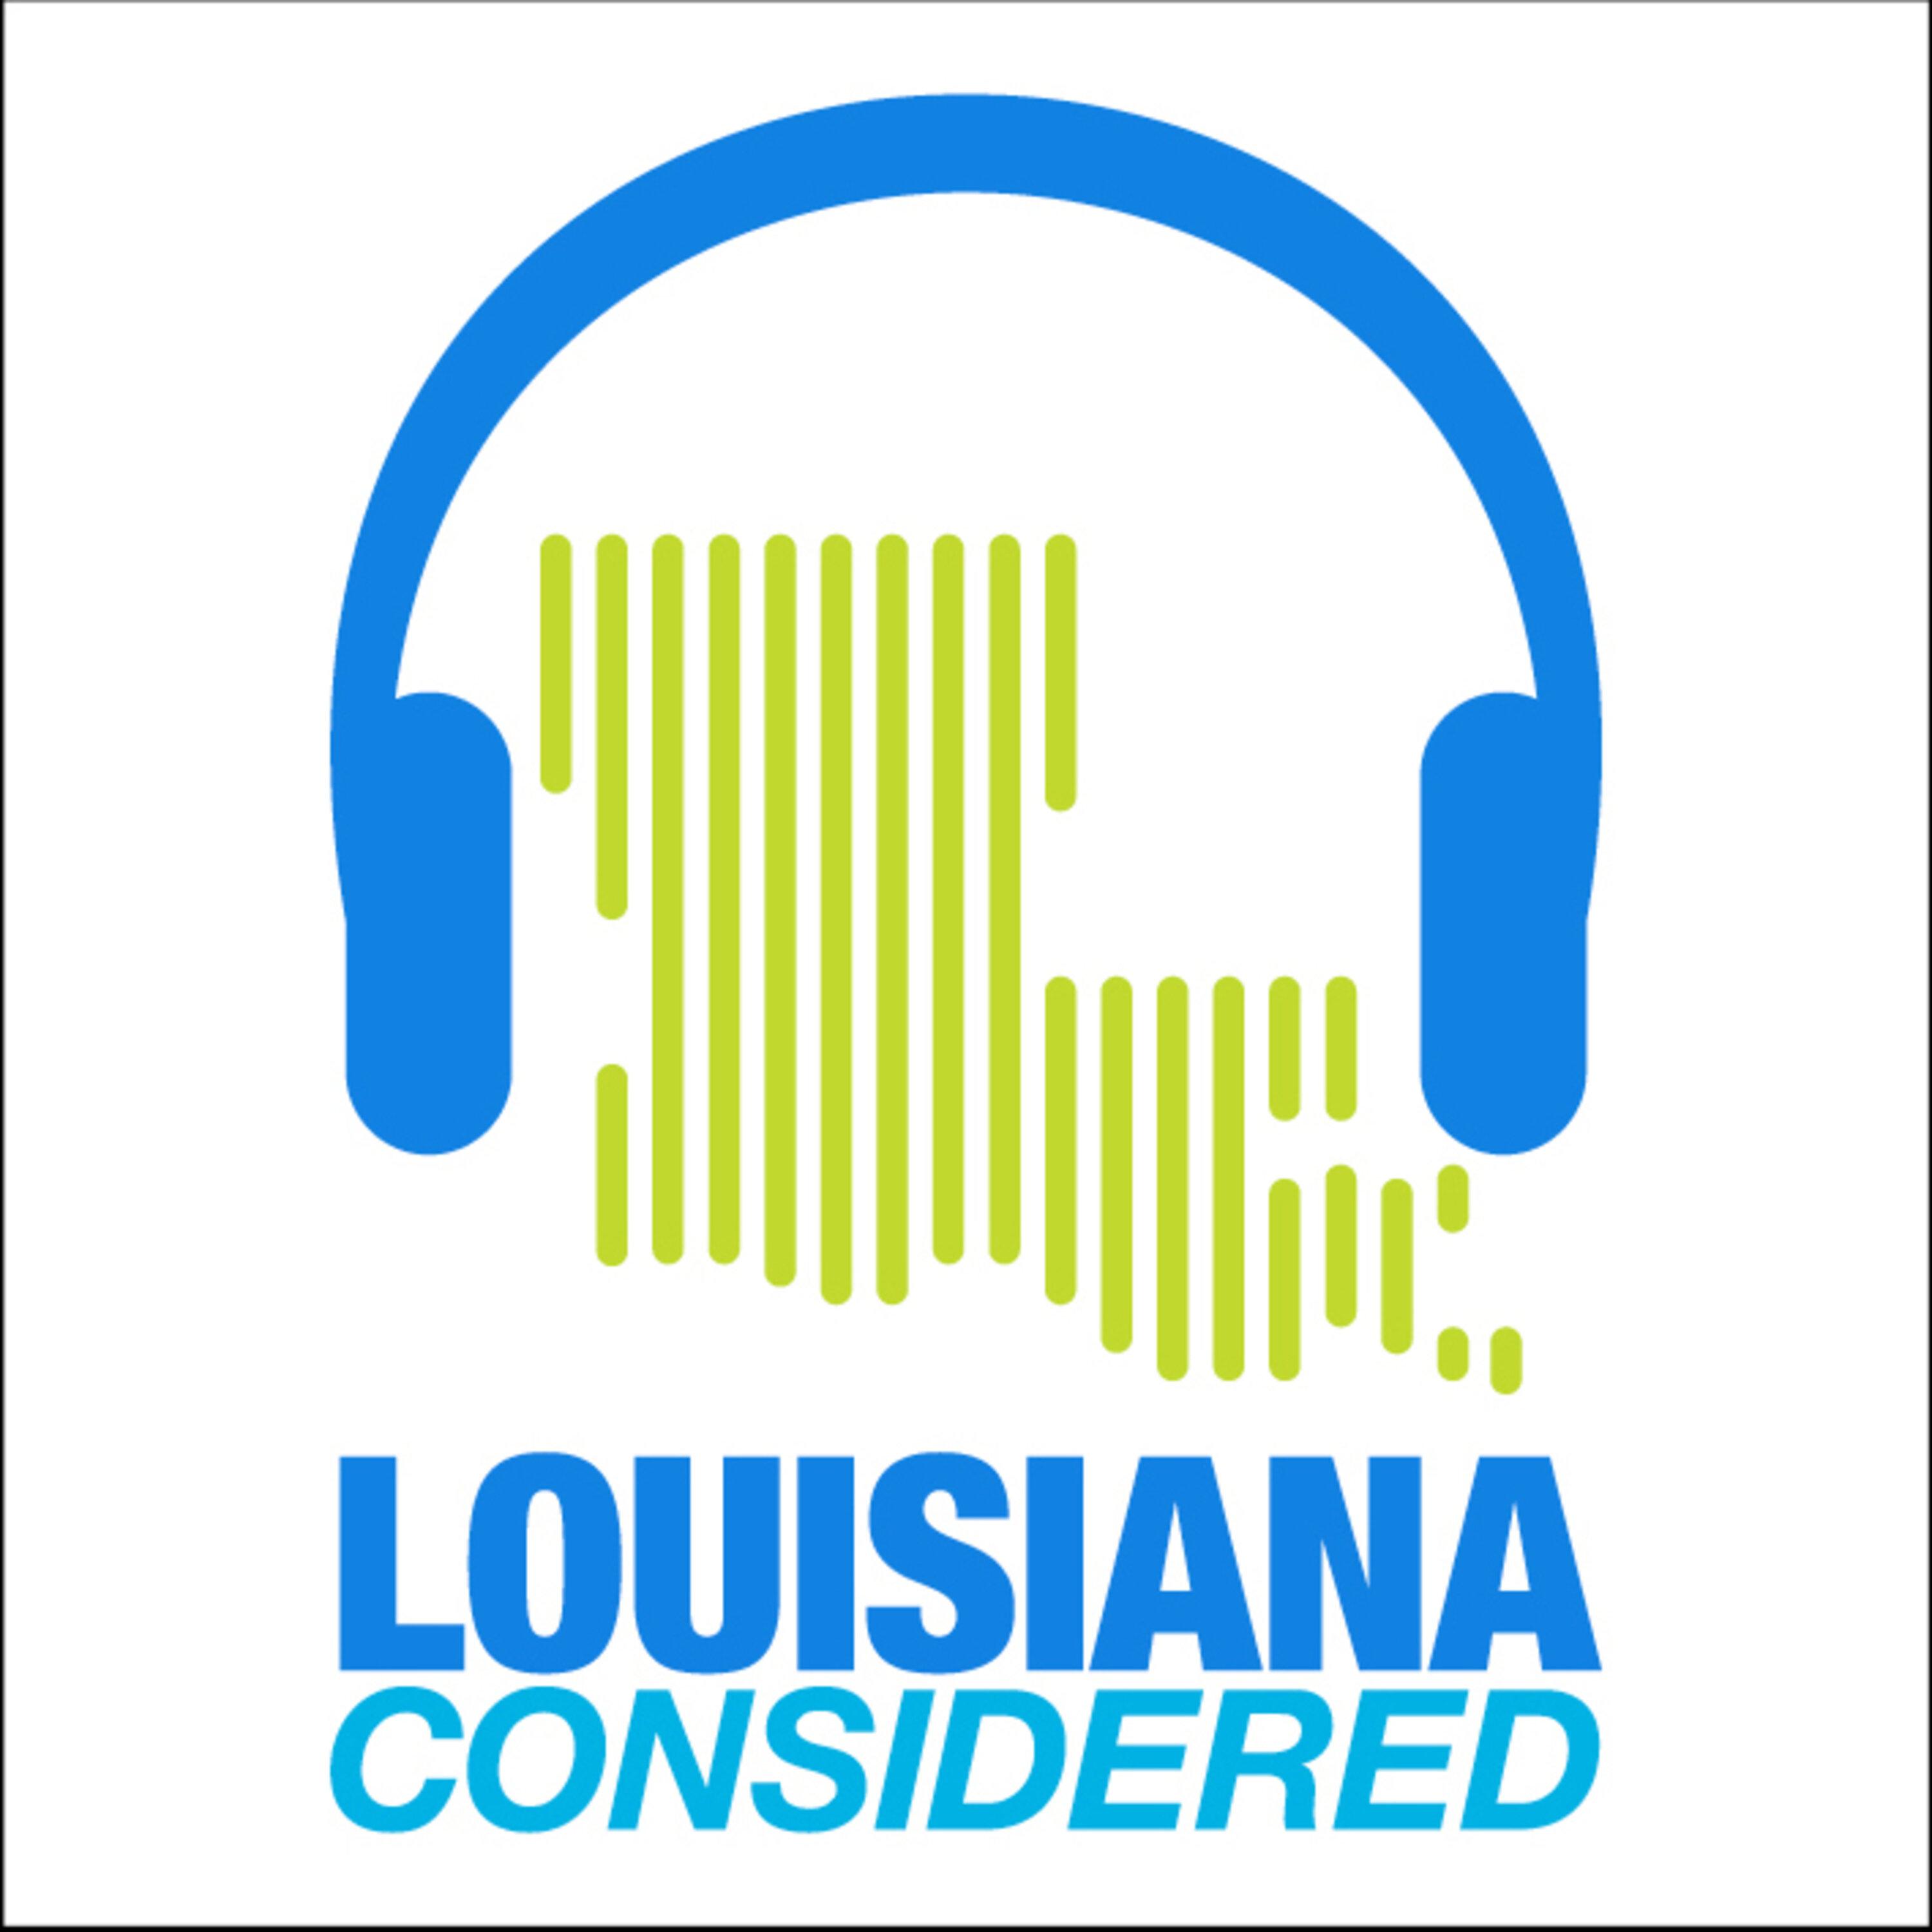 Thumbnail for "Louisiana Considered: How The LPO Navigated The Pandemic, The Role Of Community Health Centers In The Delta, Louisiana Children’s Museum Reopens".